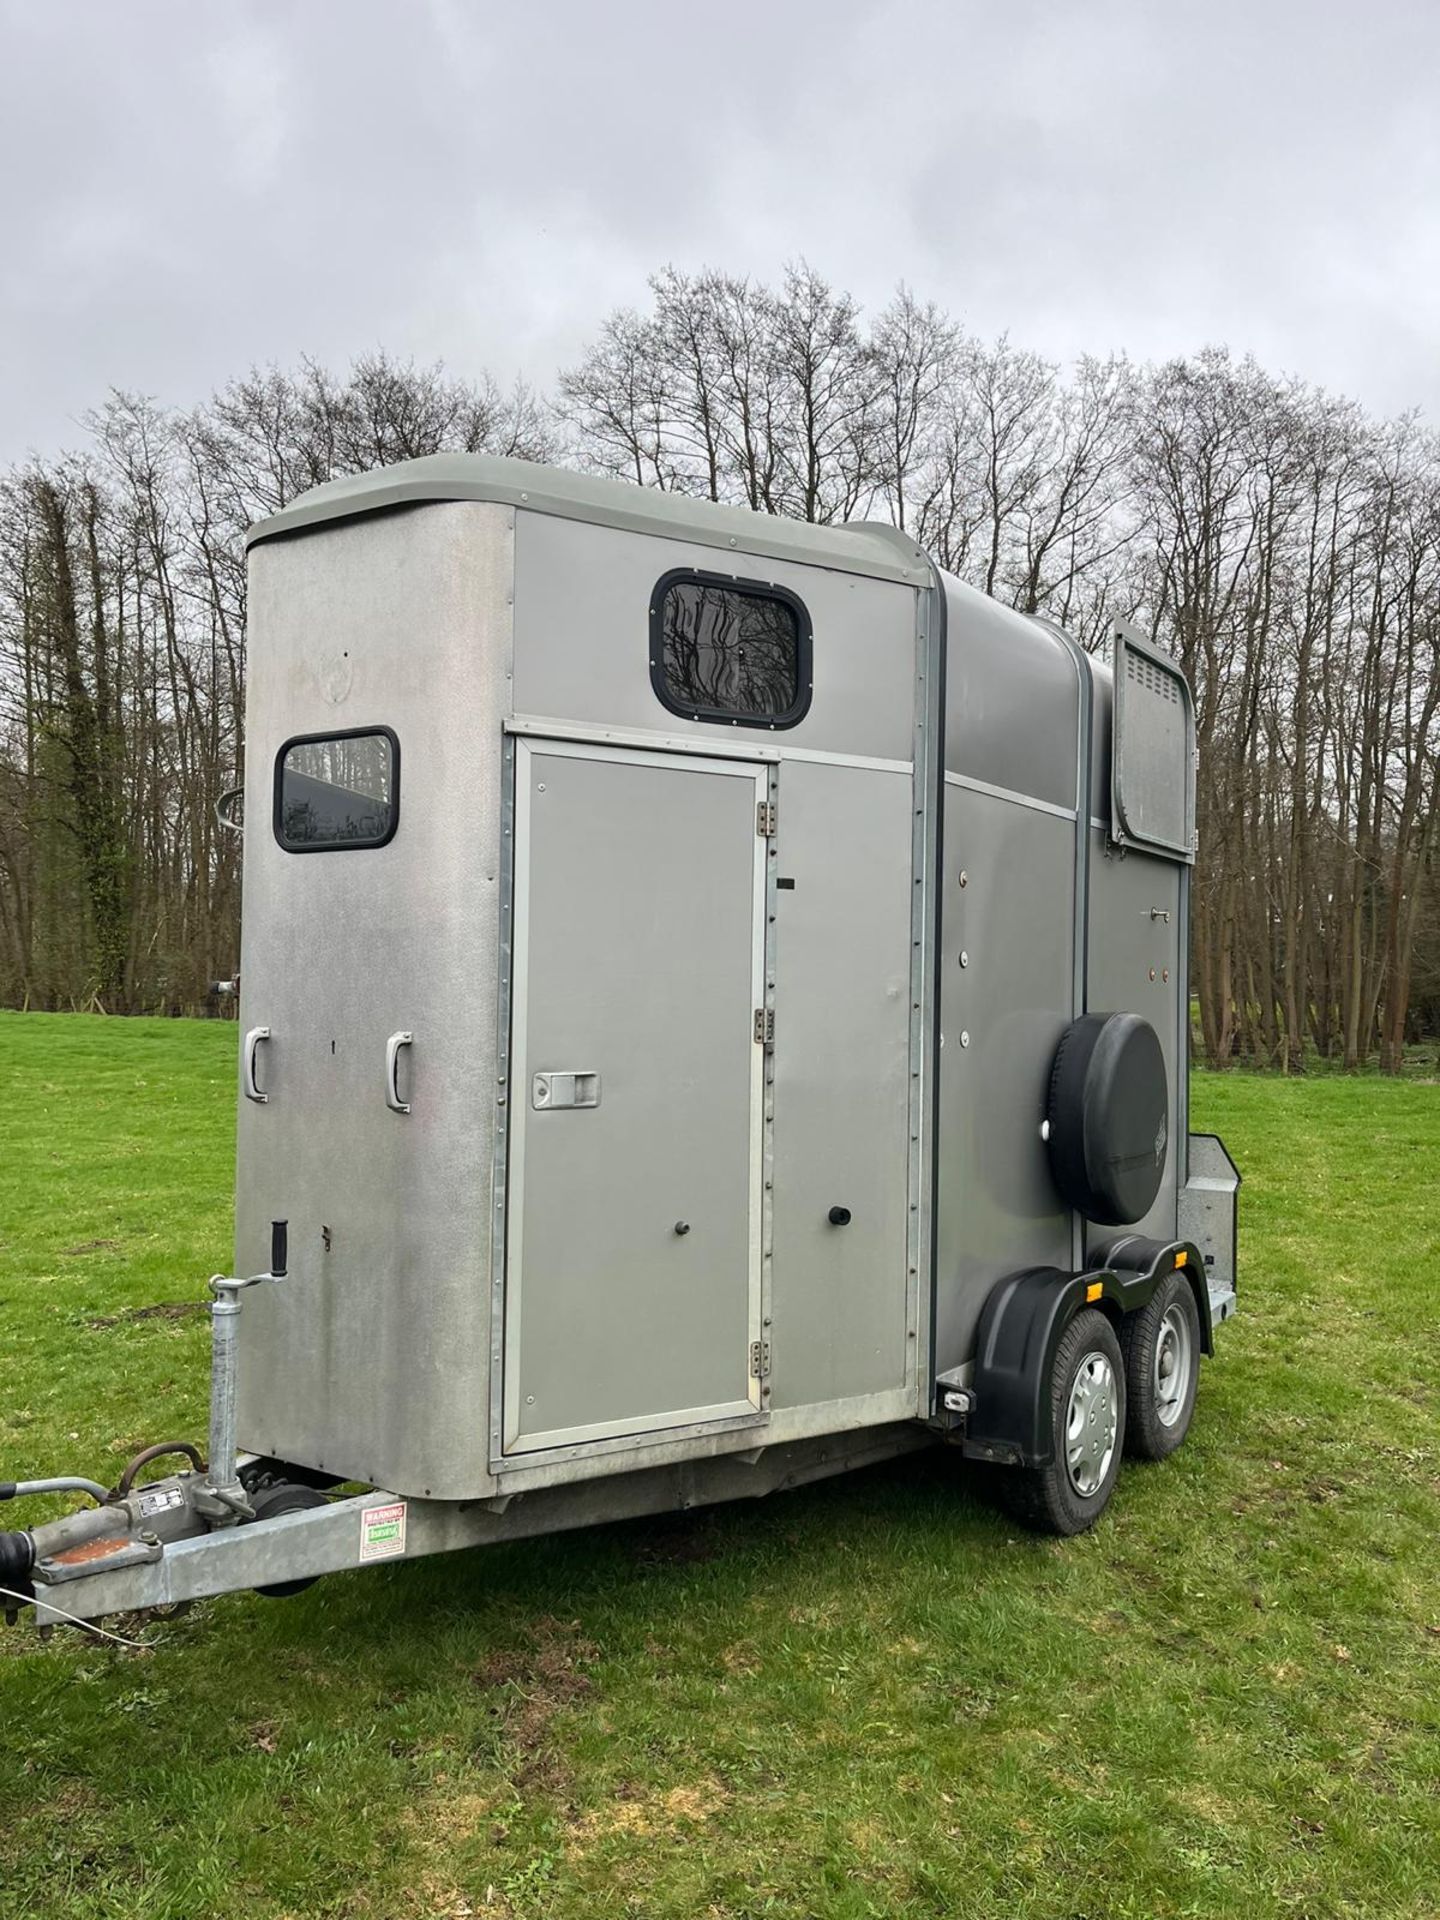 IFOR WILLIAMS HB 505 Classic 2 Horse Trailer, manufactured by Ifor Williams in 2006 - Image 3 of 5